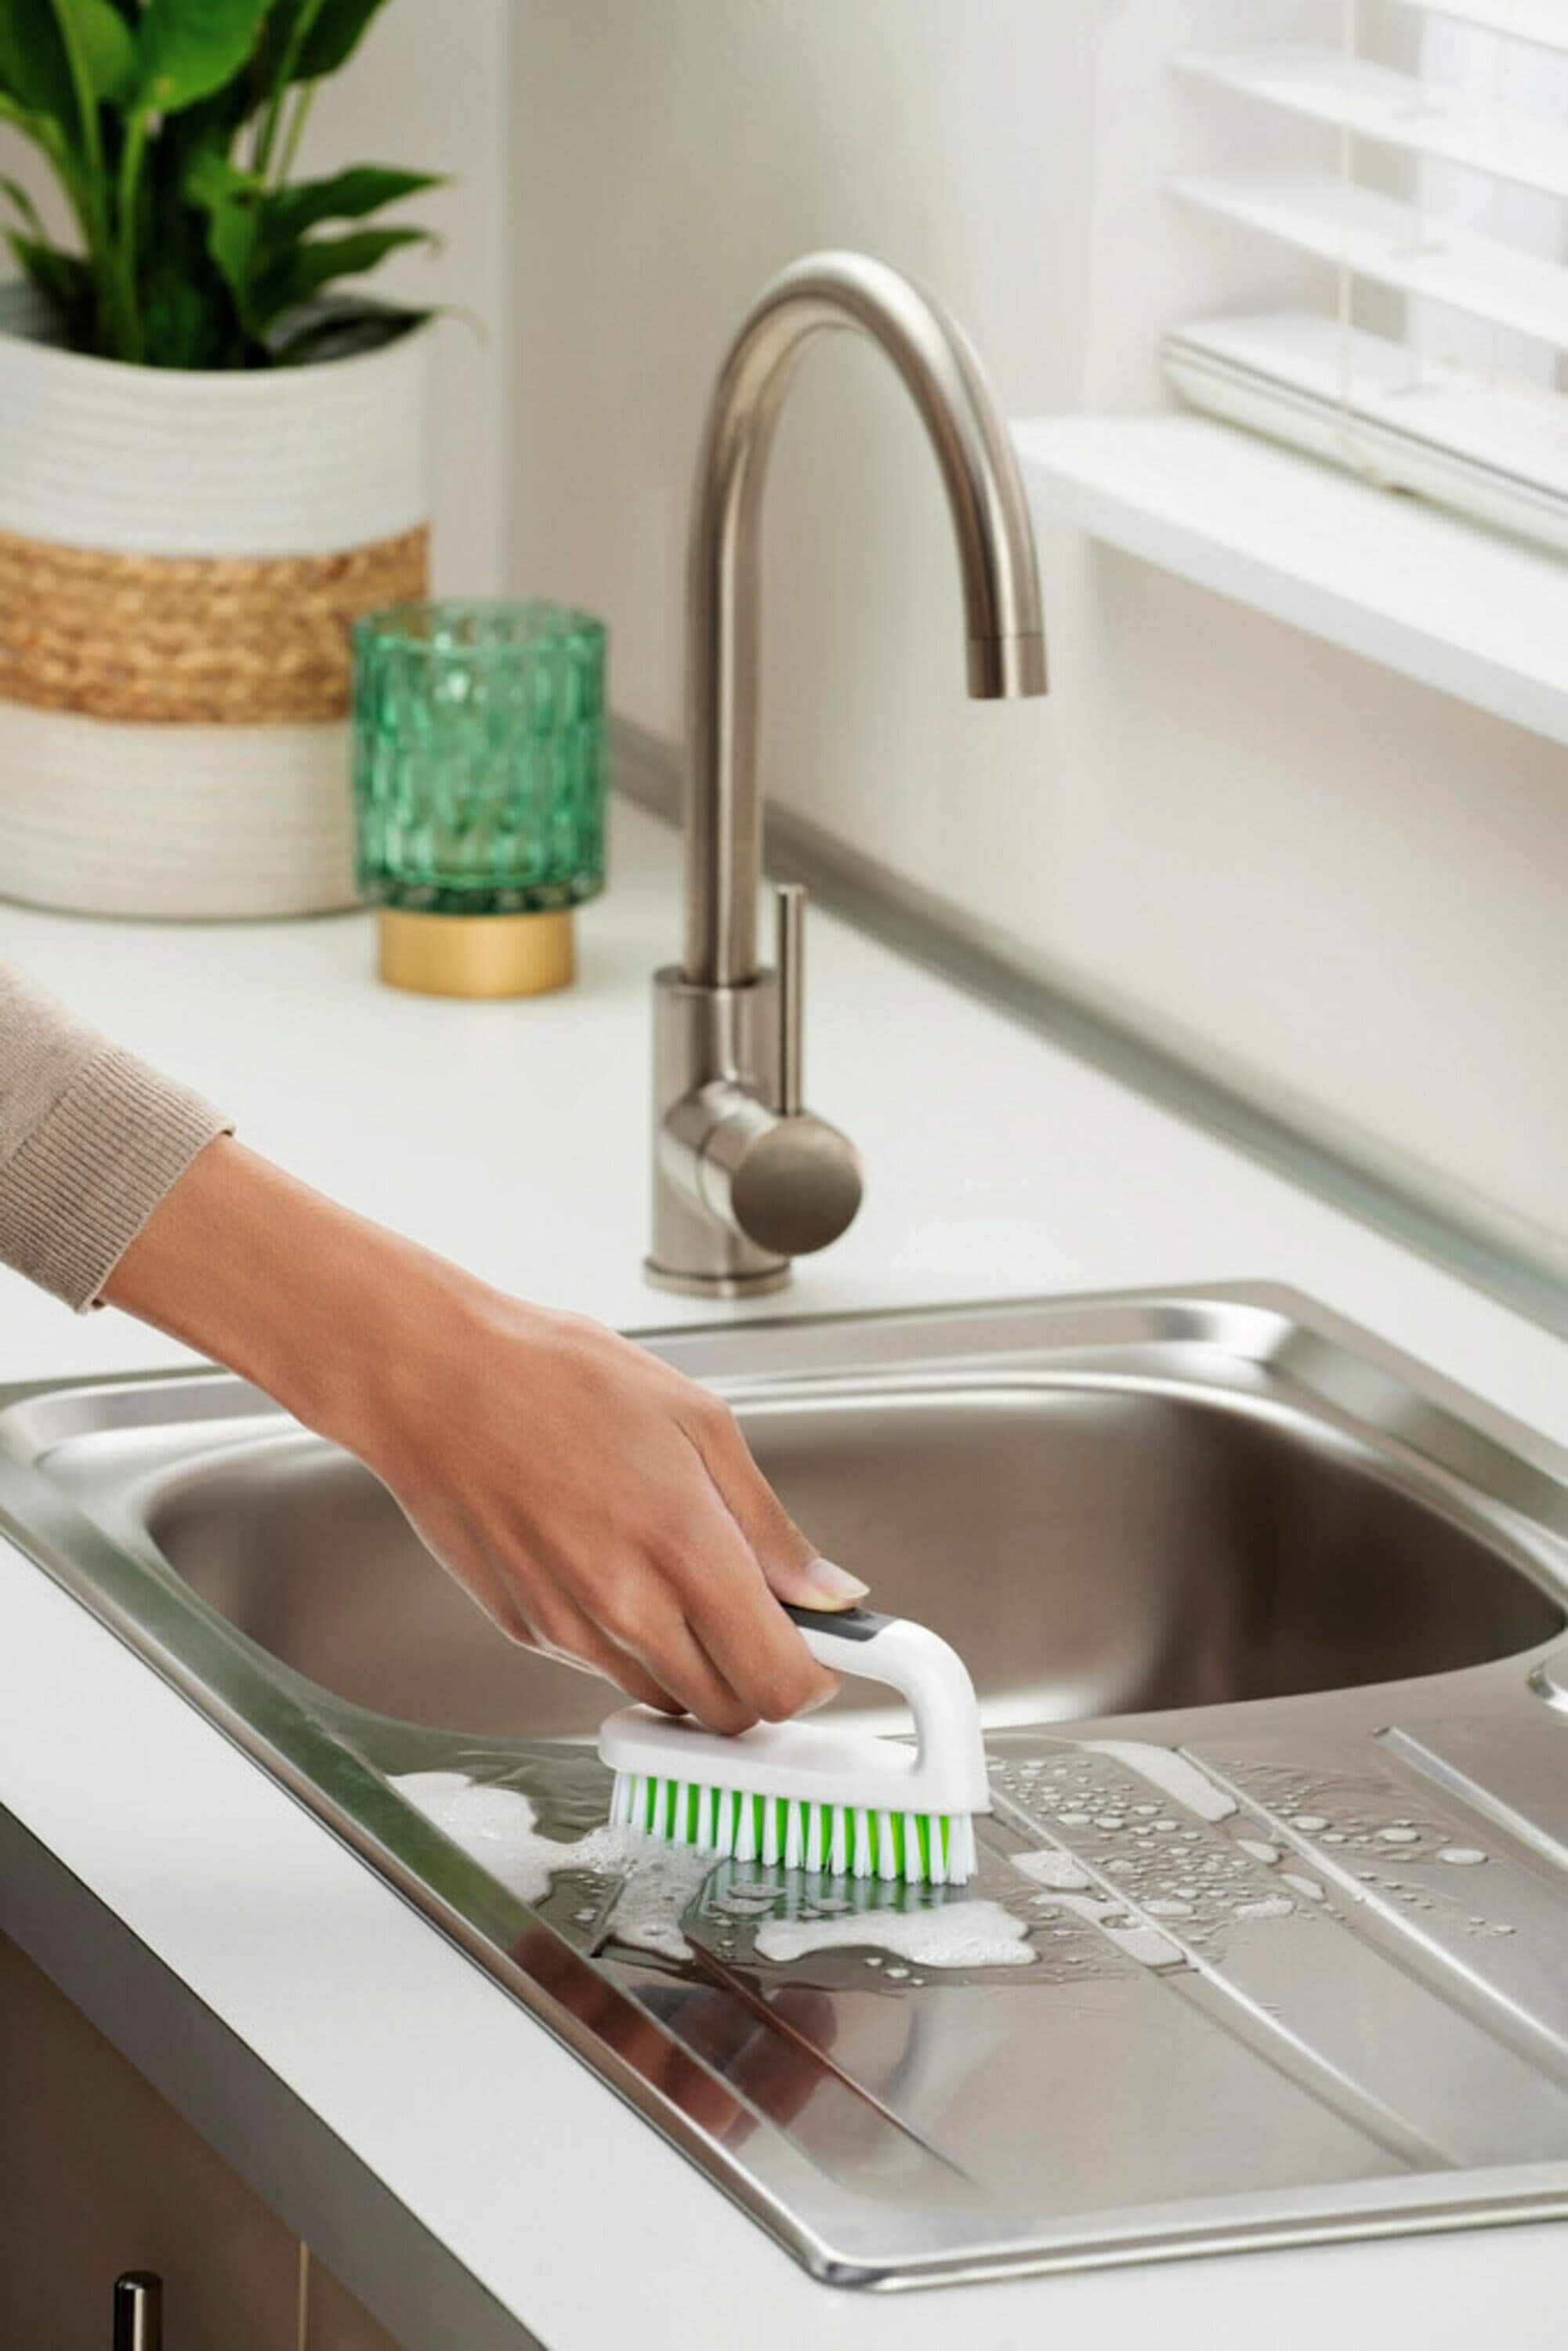 Kitchen Sink Squeegee Board And Countertop Brush, Multifunctional